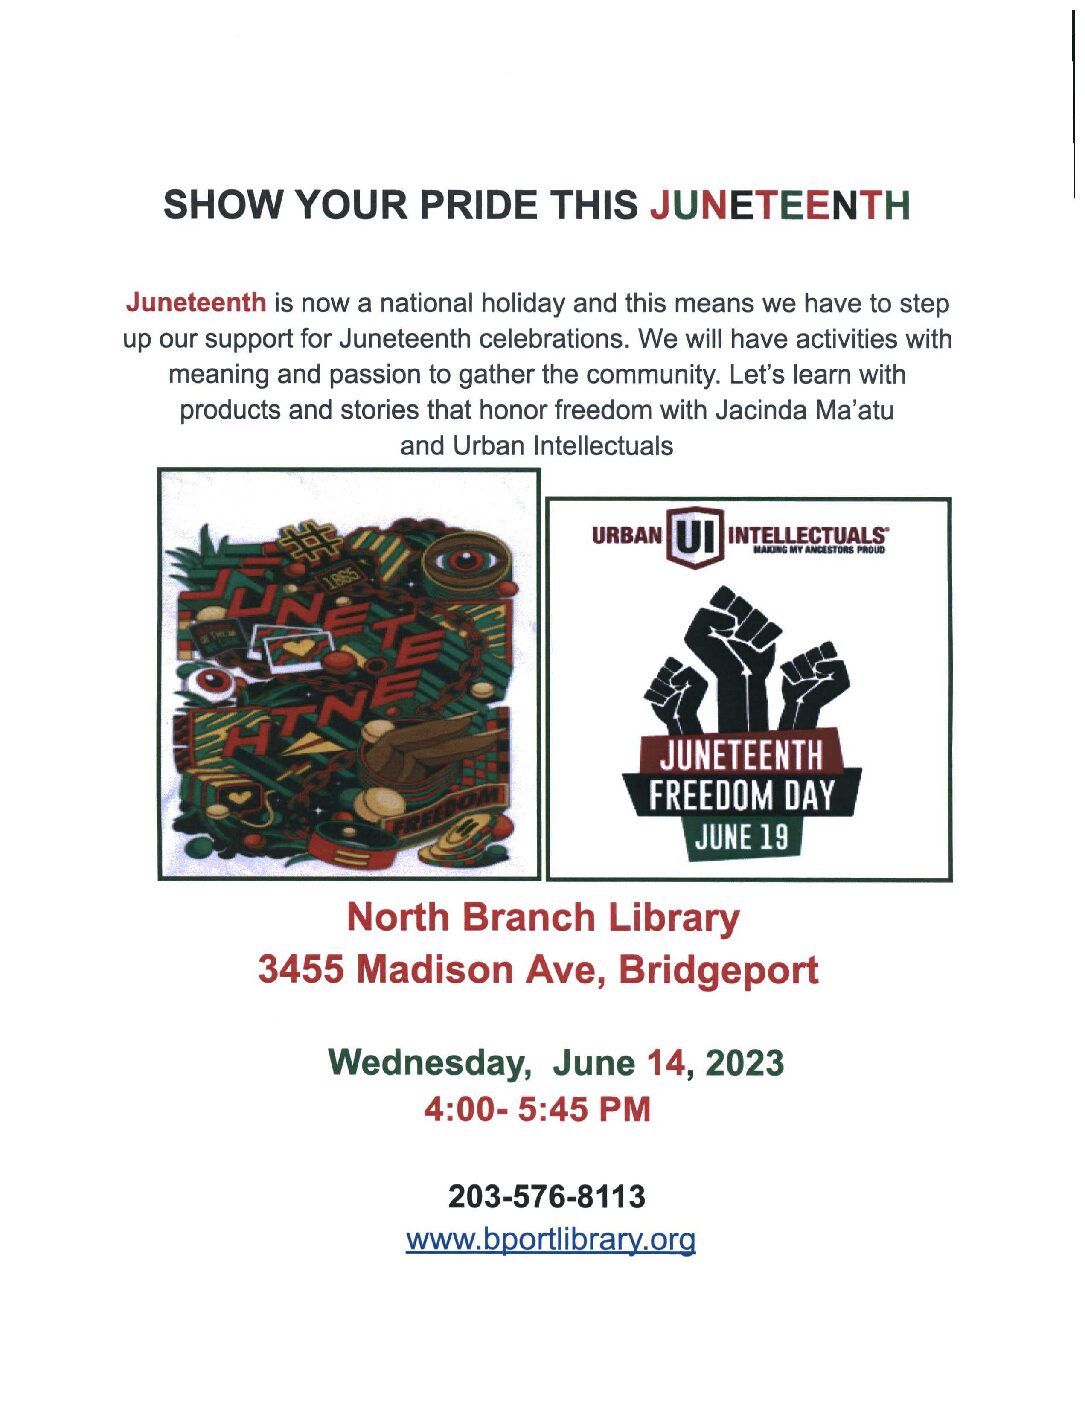 Show Your Pride This Juneteenth